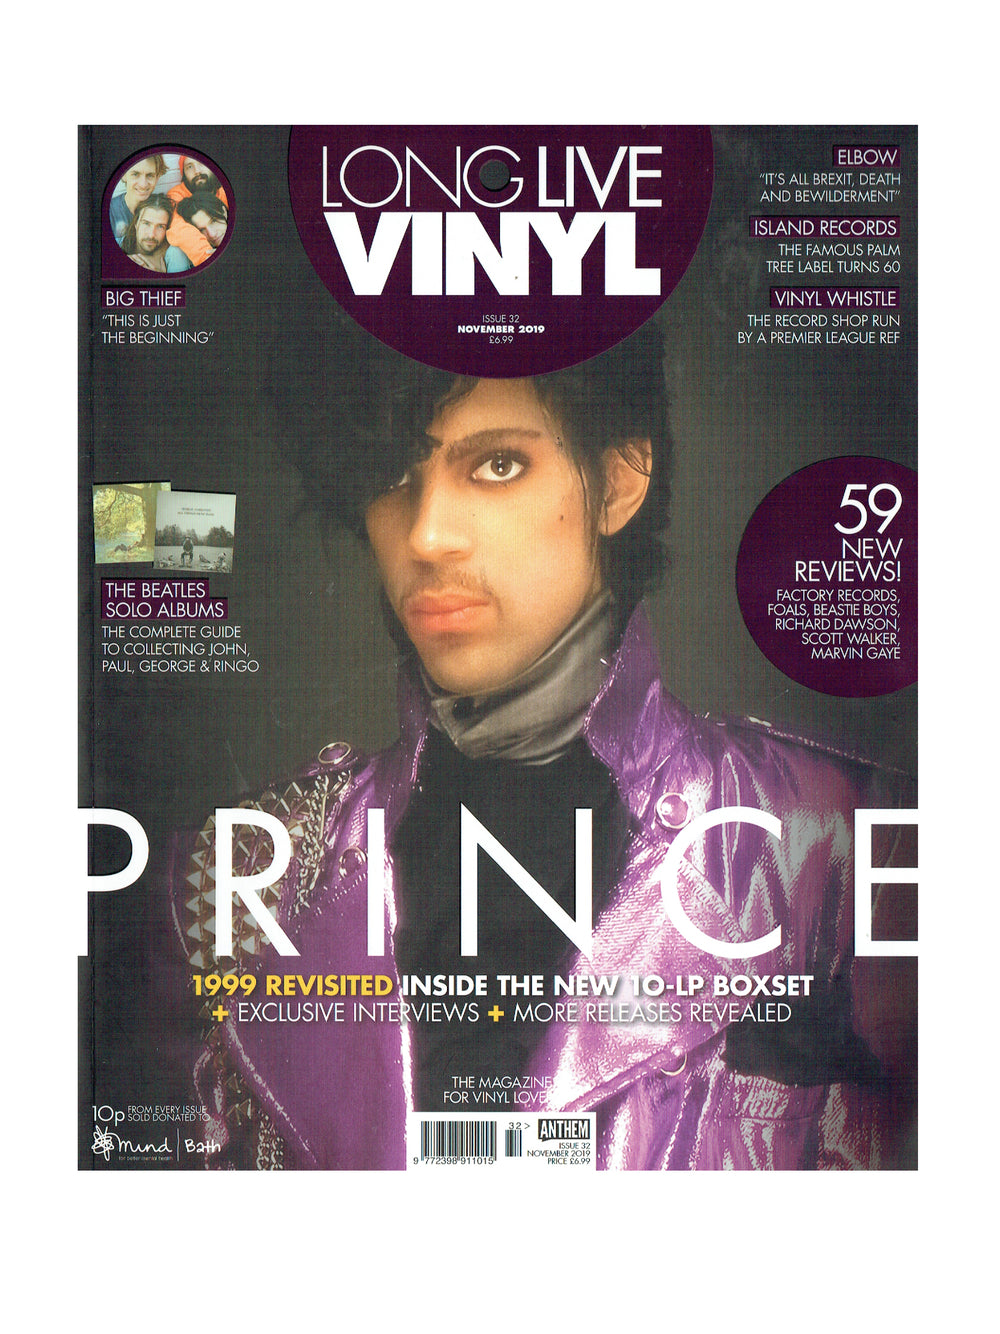 Prince – Long Live Vinyl Magazine November 2019 Front Cover & 8 Page Article